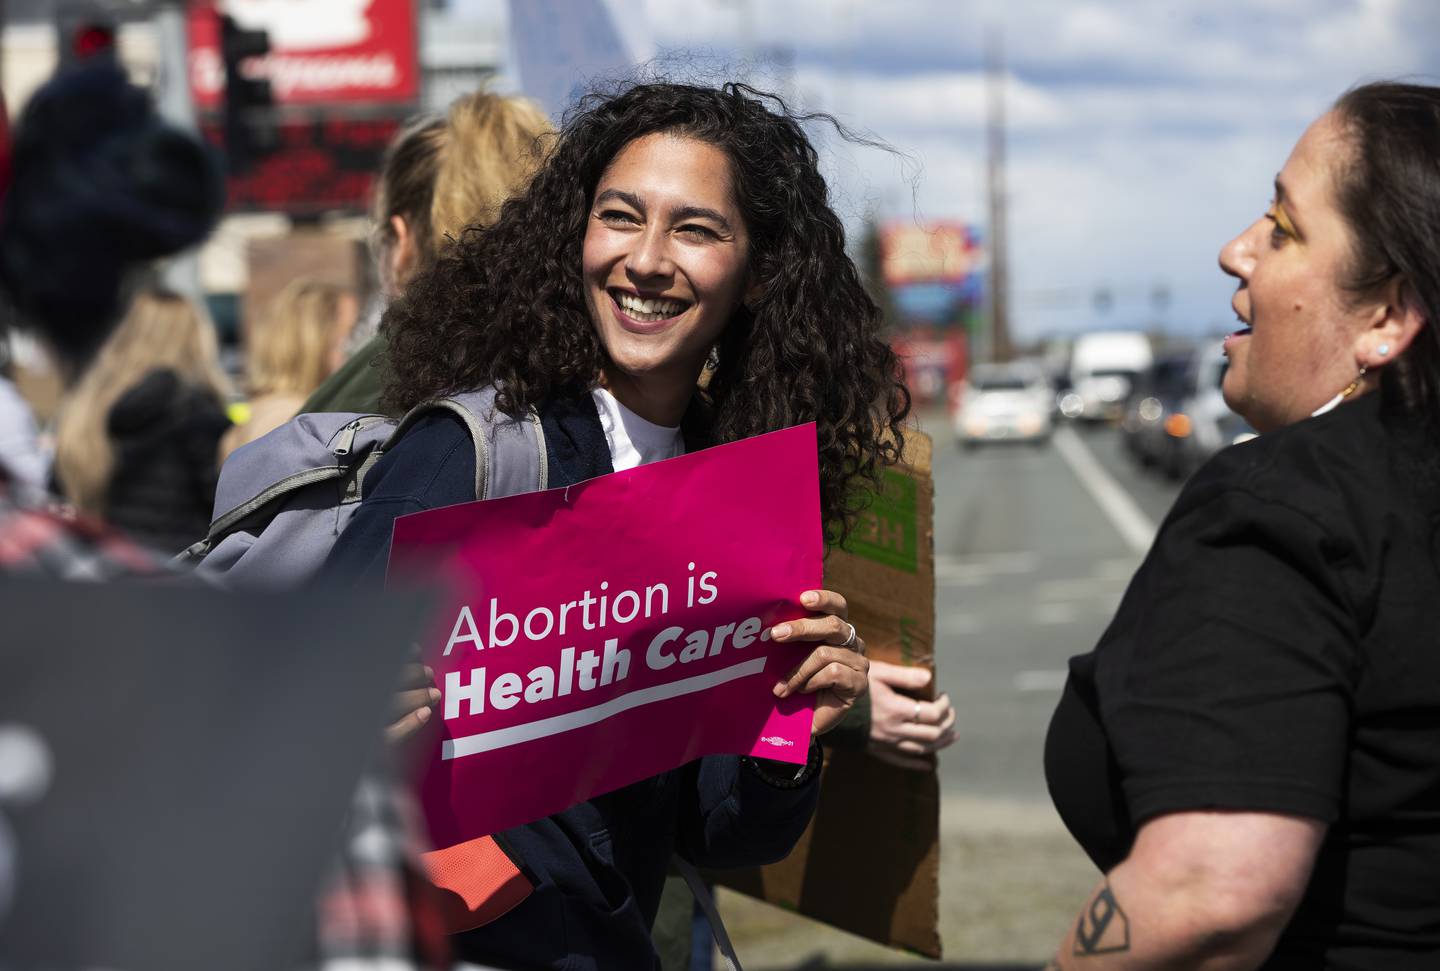 planned parenthood, roe v wade, abortion, women’s rights, women’s health care, rally, protest